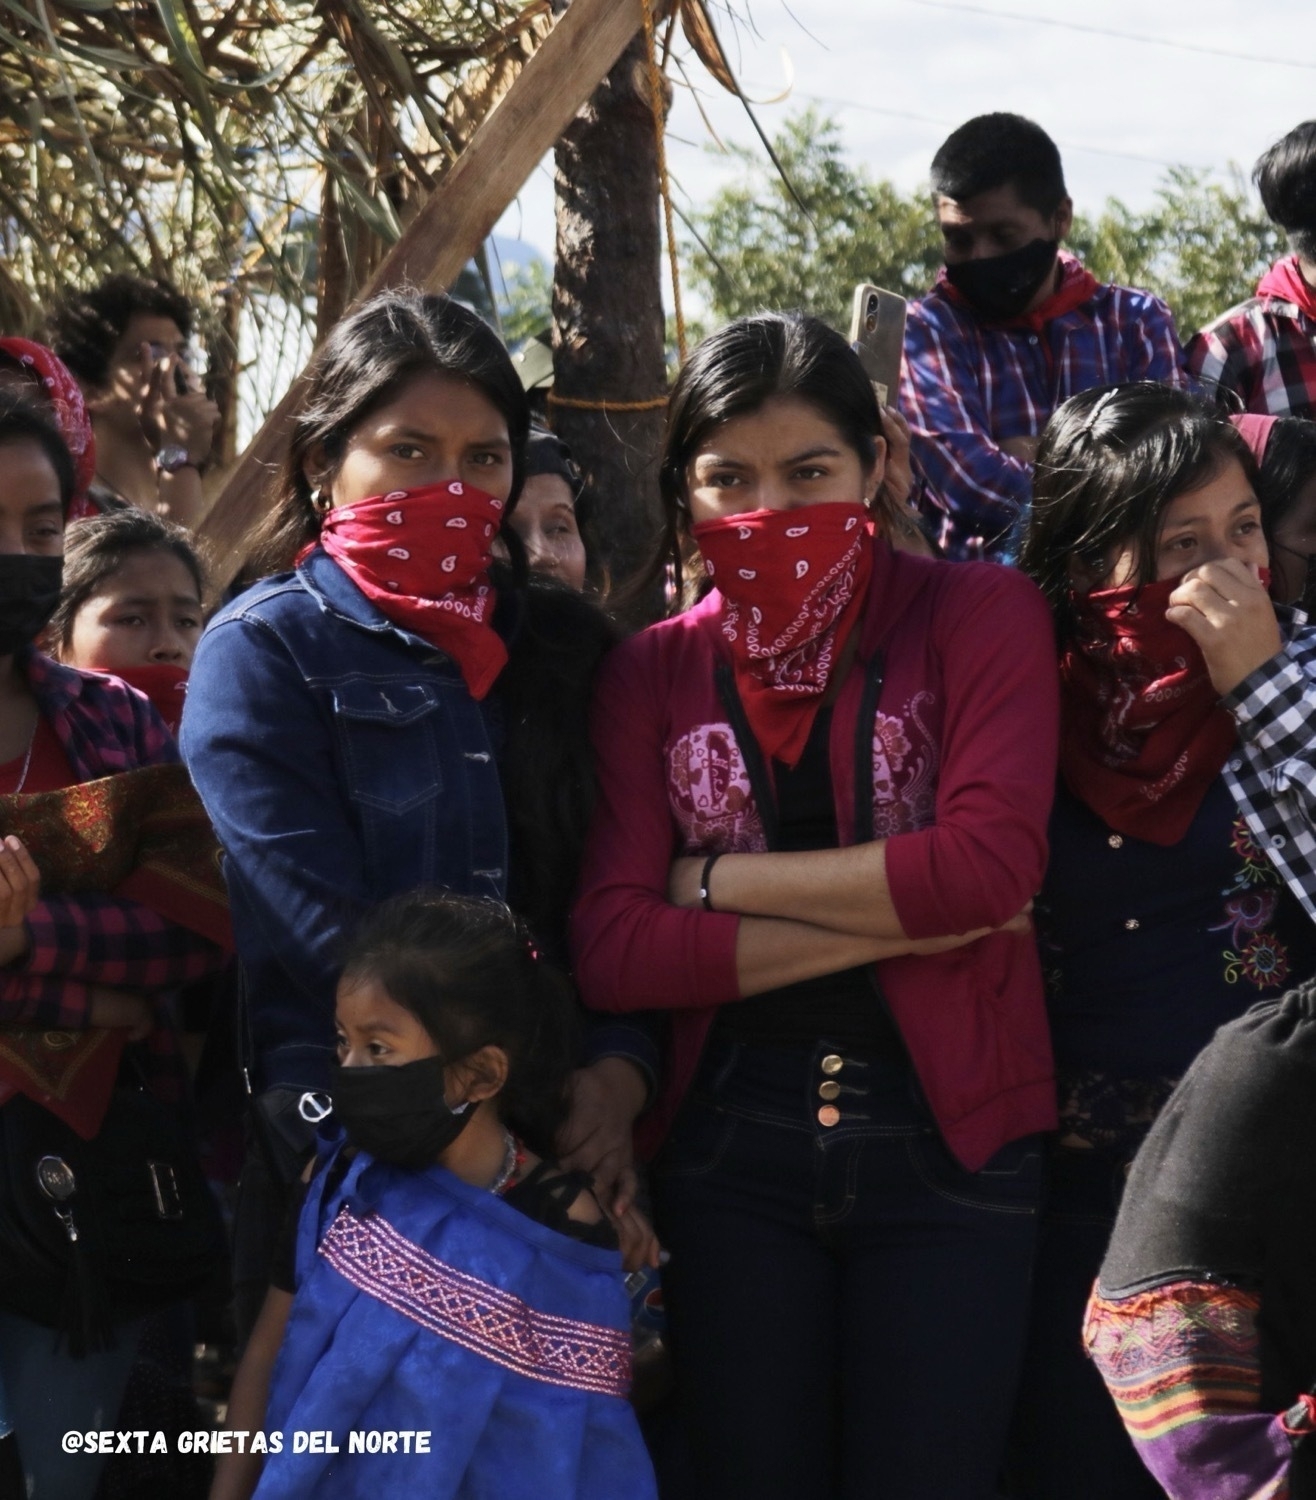 Three indigenous women in the foreground of an image, a young girl in front of them are wearing bandanas on their faces. Around and behind them are other indigenous people similarly masked